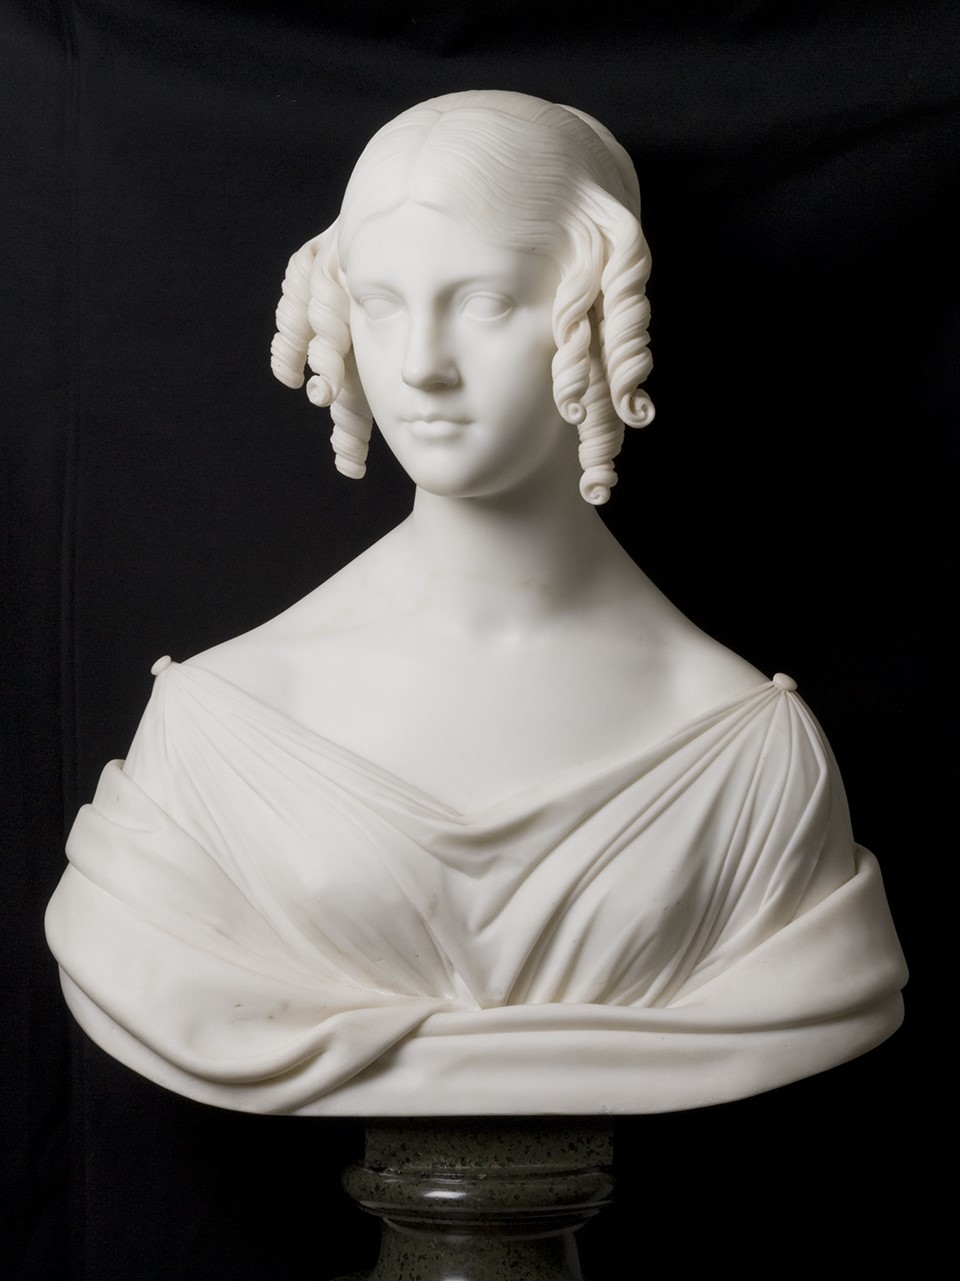 A white marble bust of Frances E. Appleton from 1836.